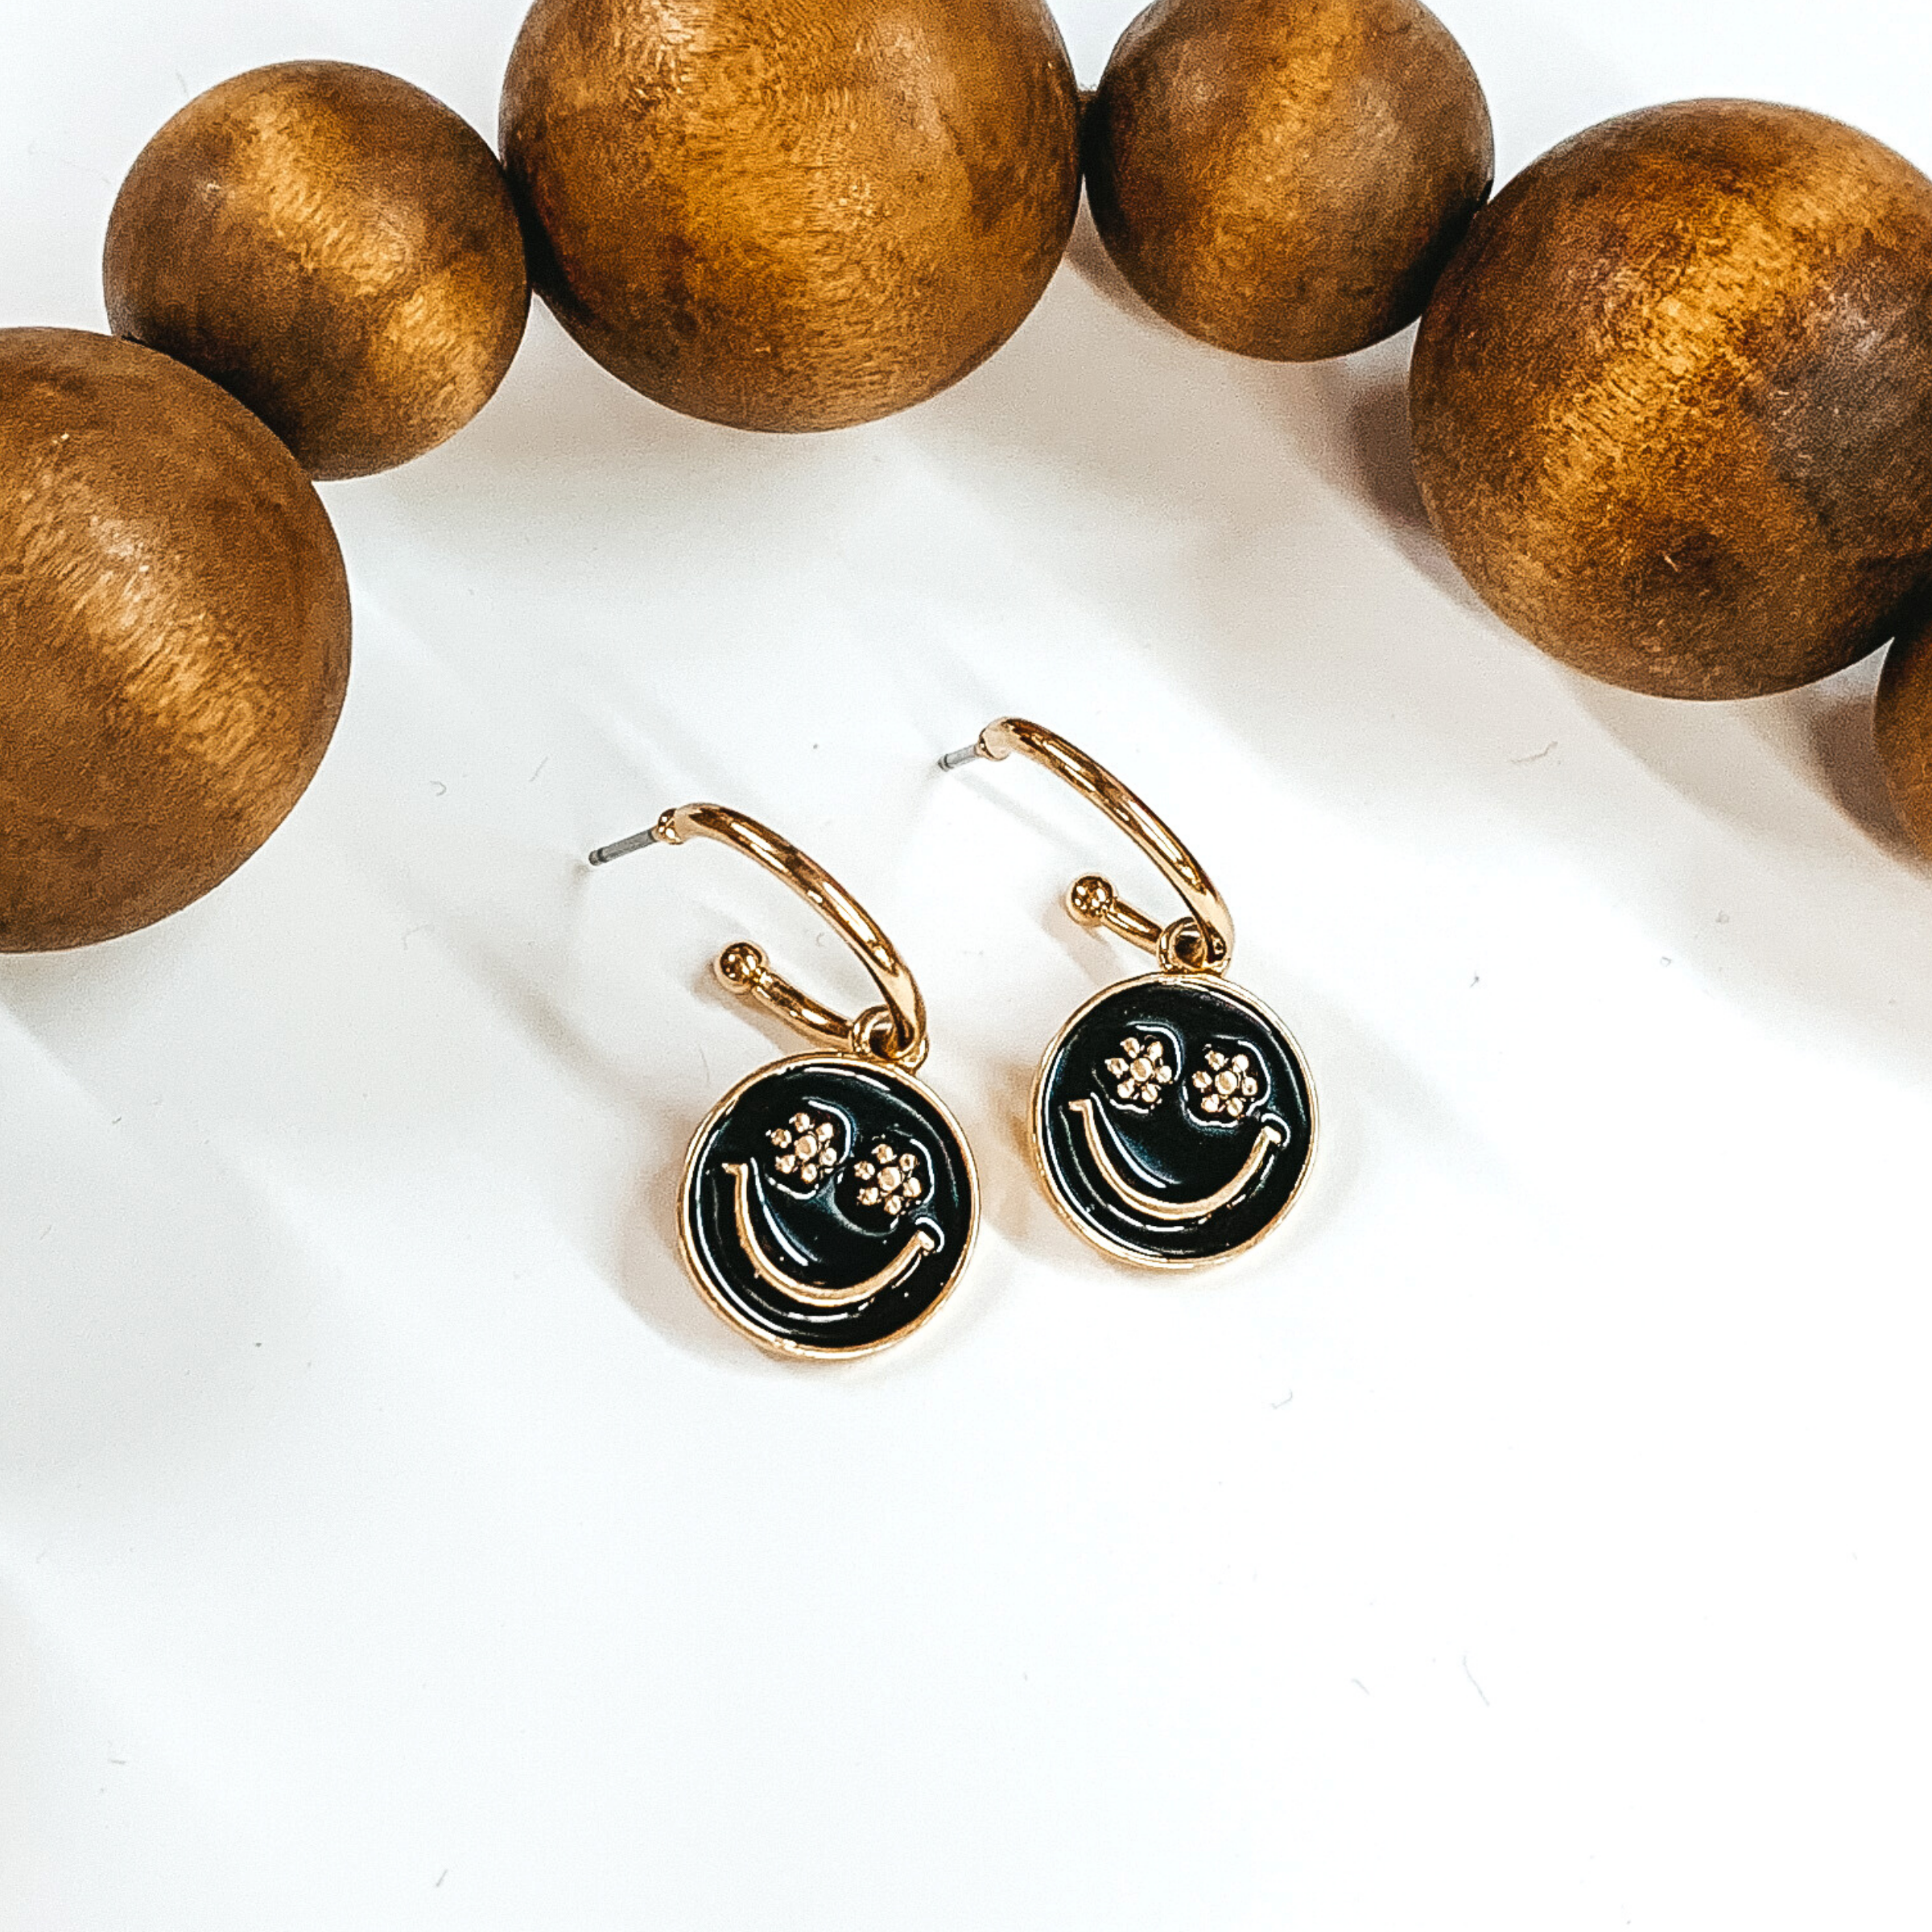 Small, gold hoop earrings with a hanging circle pendant in black. The pendant has a gold smiley face with the eyes being small flowers. These earrings are pictured laying on a white background with dark brown beads at the top of the picture. 